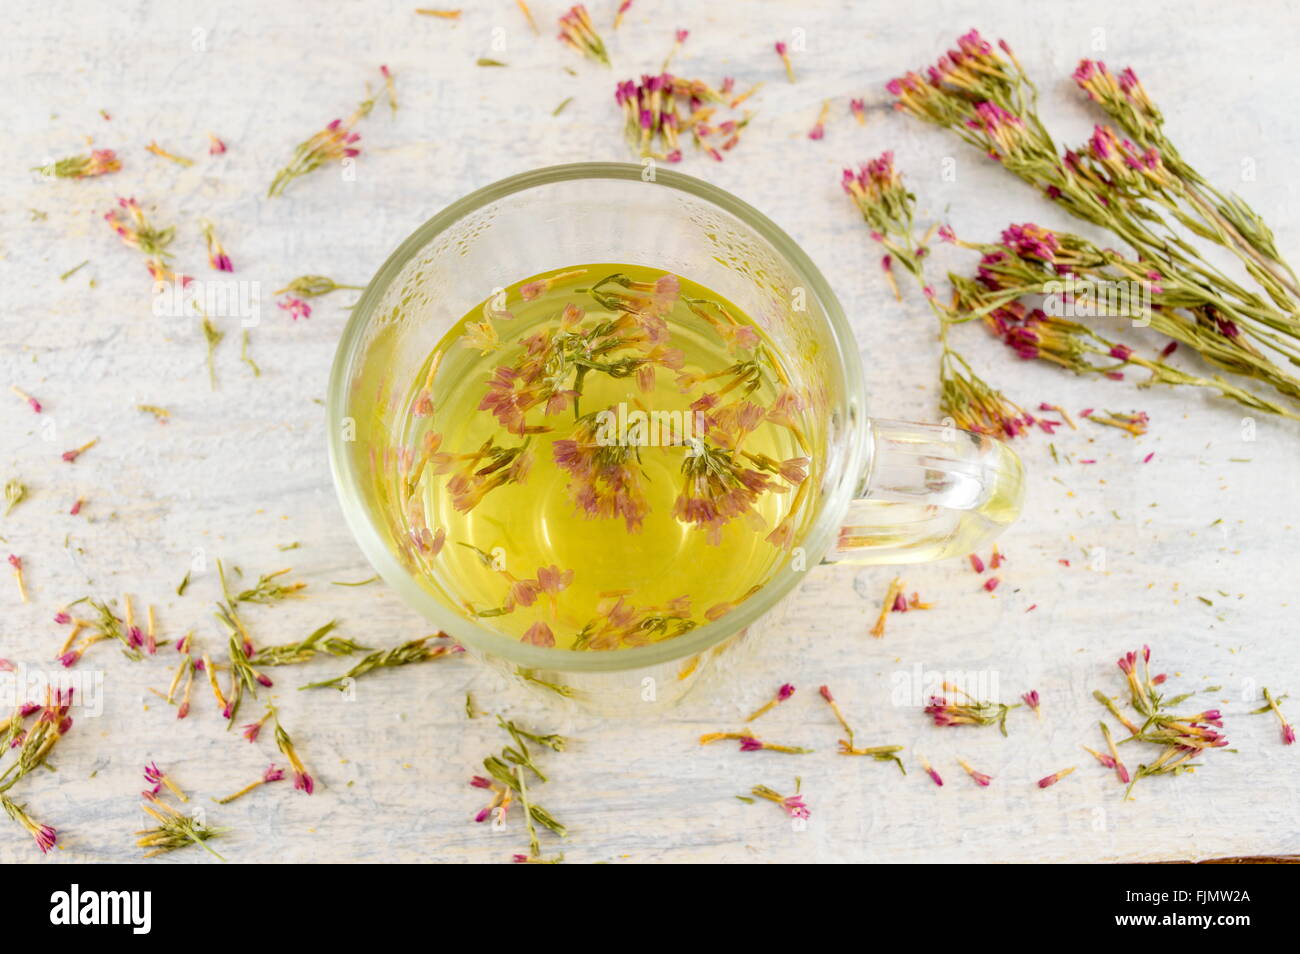 Hot bitter-grass tea in a teacup on a decorated table Stock Photo